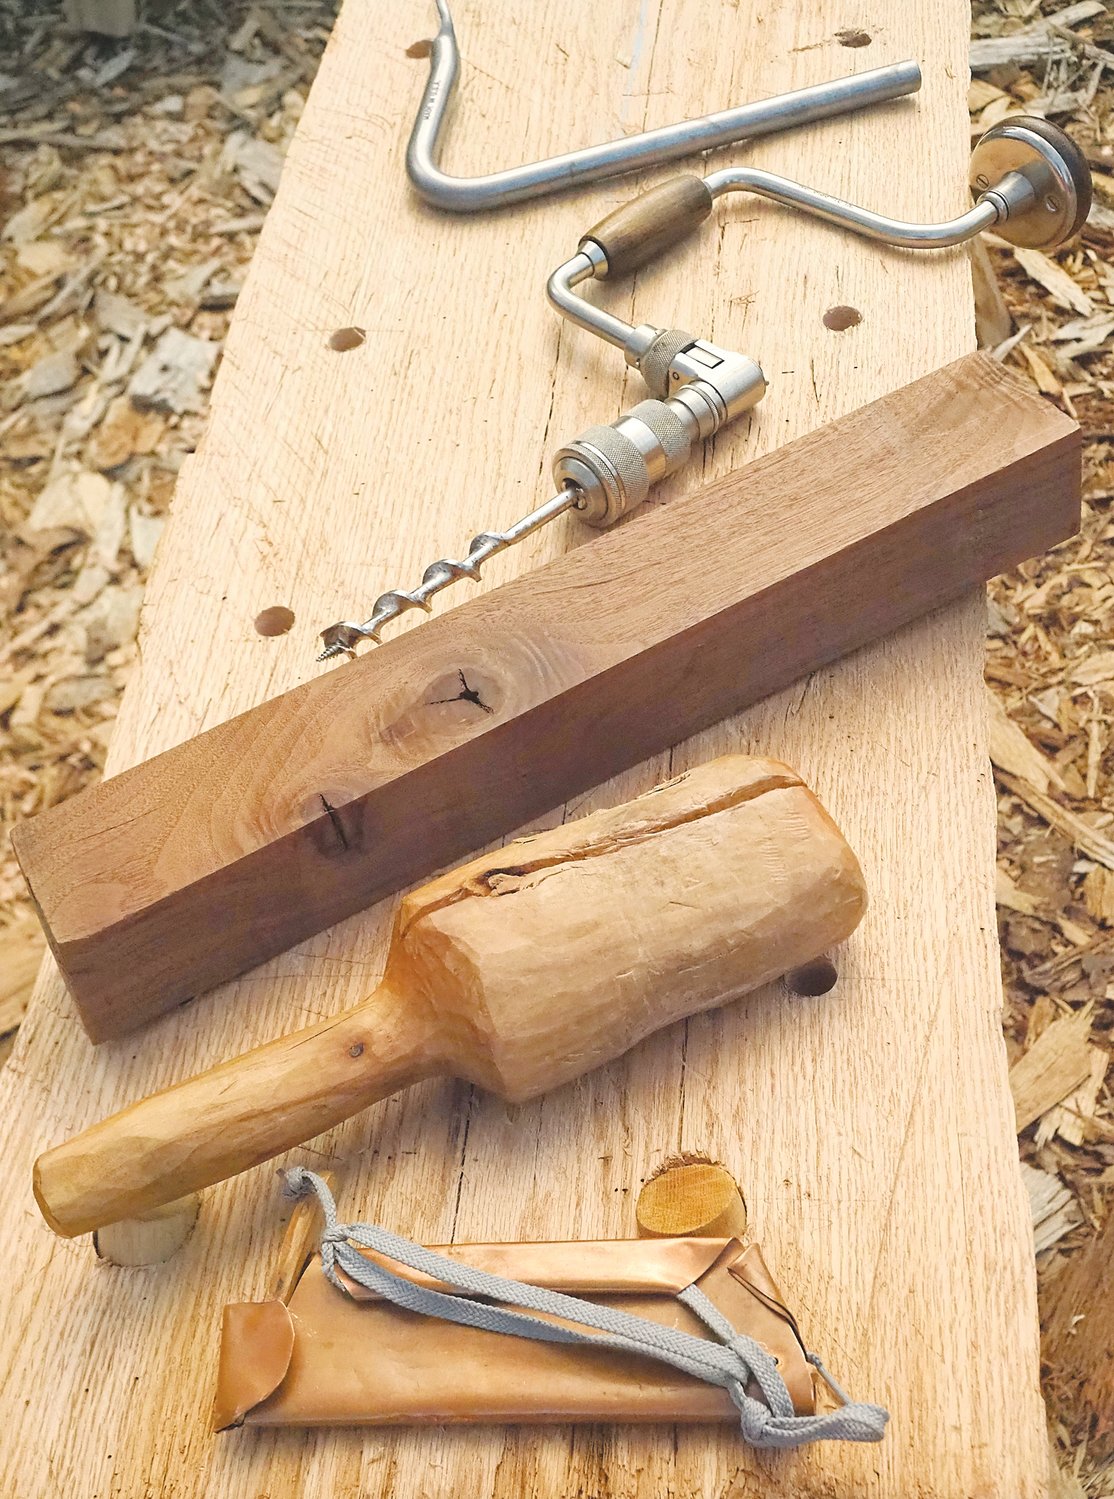 Tools of the green woodworking trade.